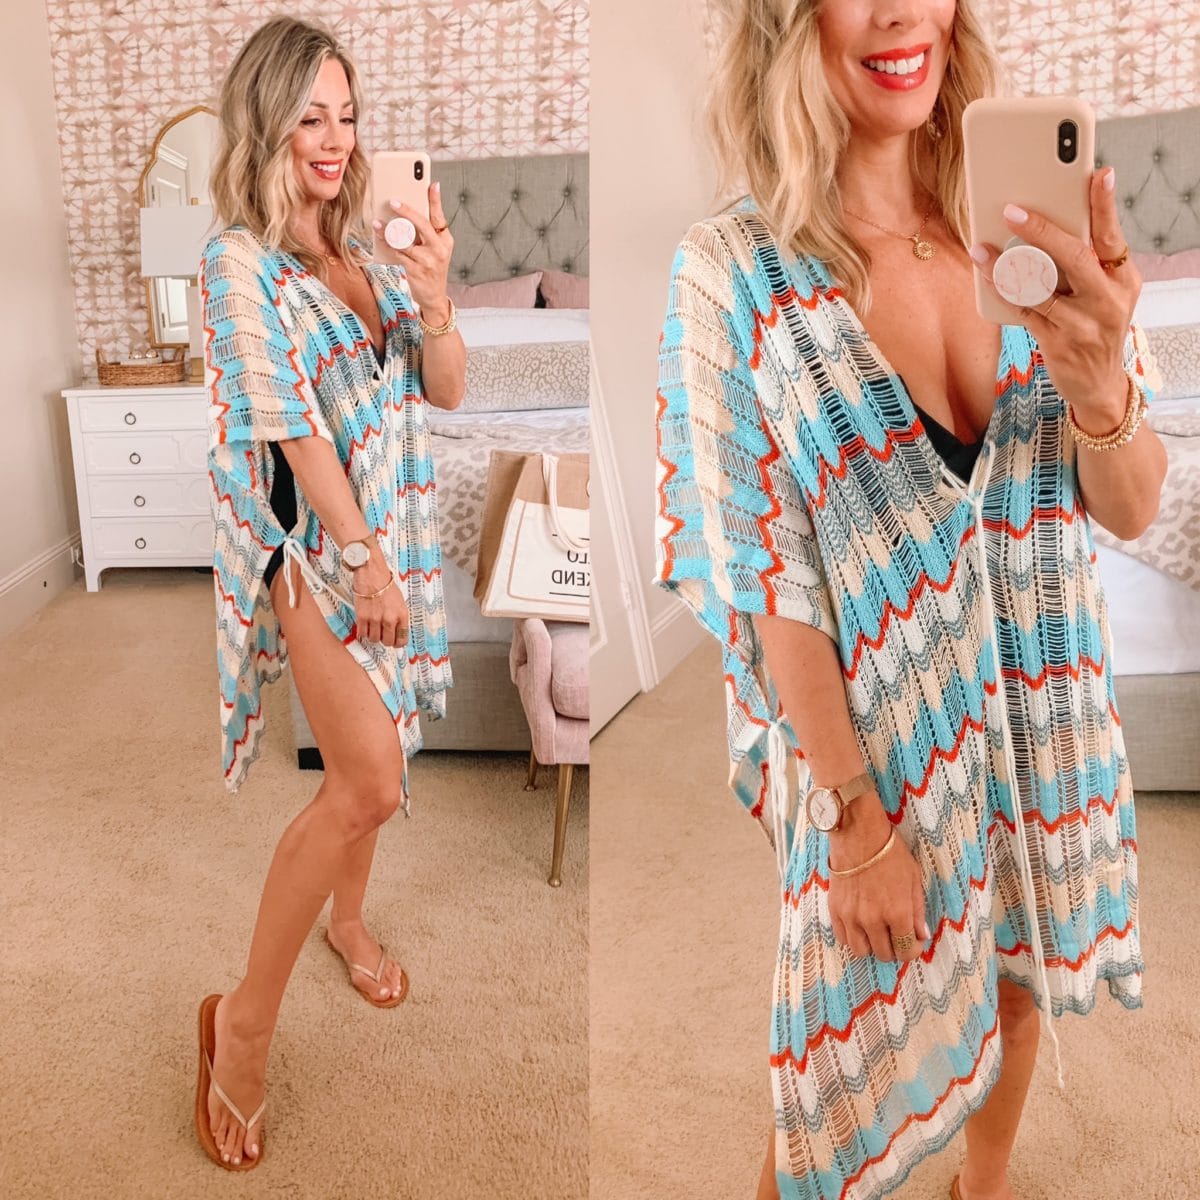 Amazon Fashion Faves, Swim Cover Up and Flip Flops 